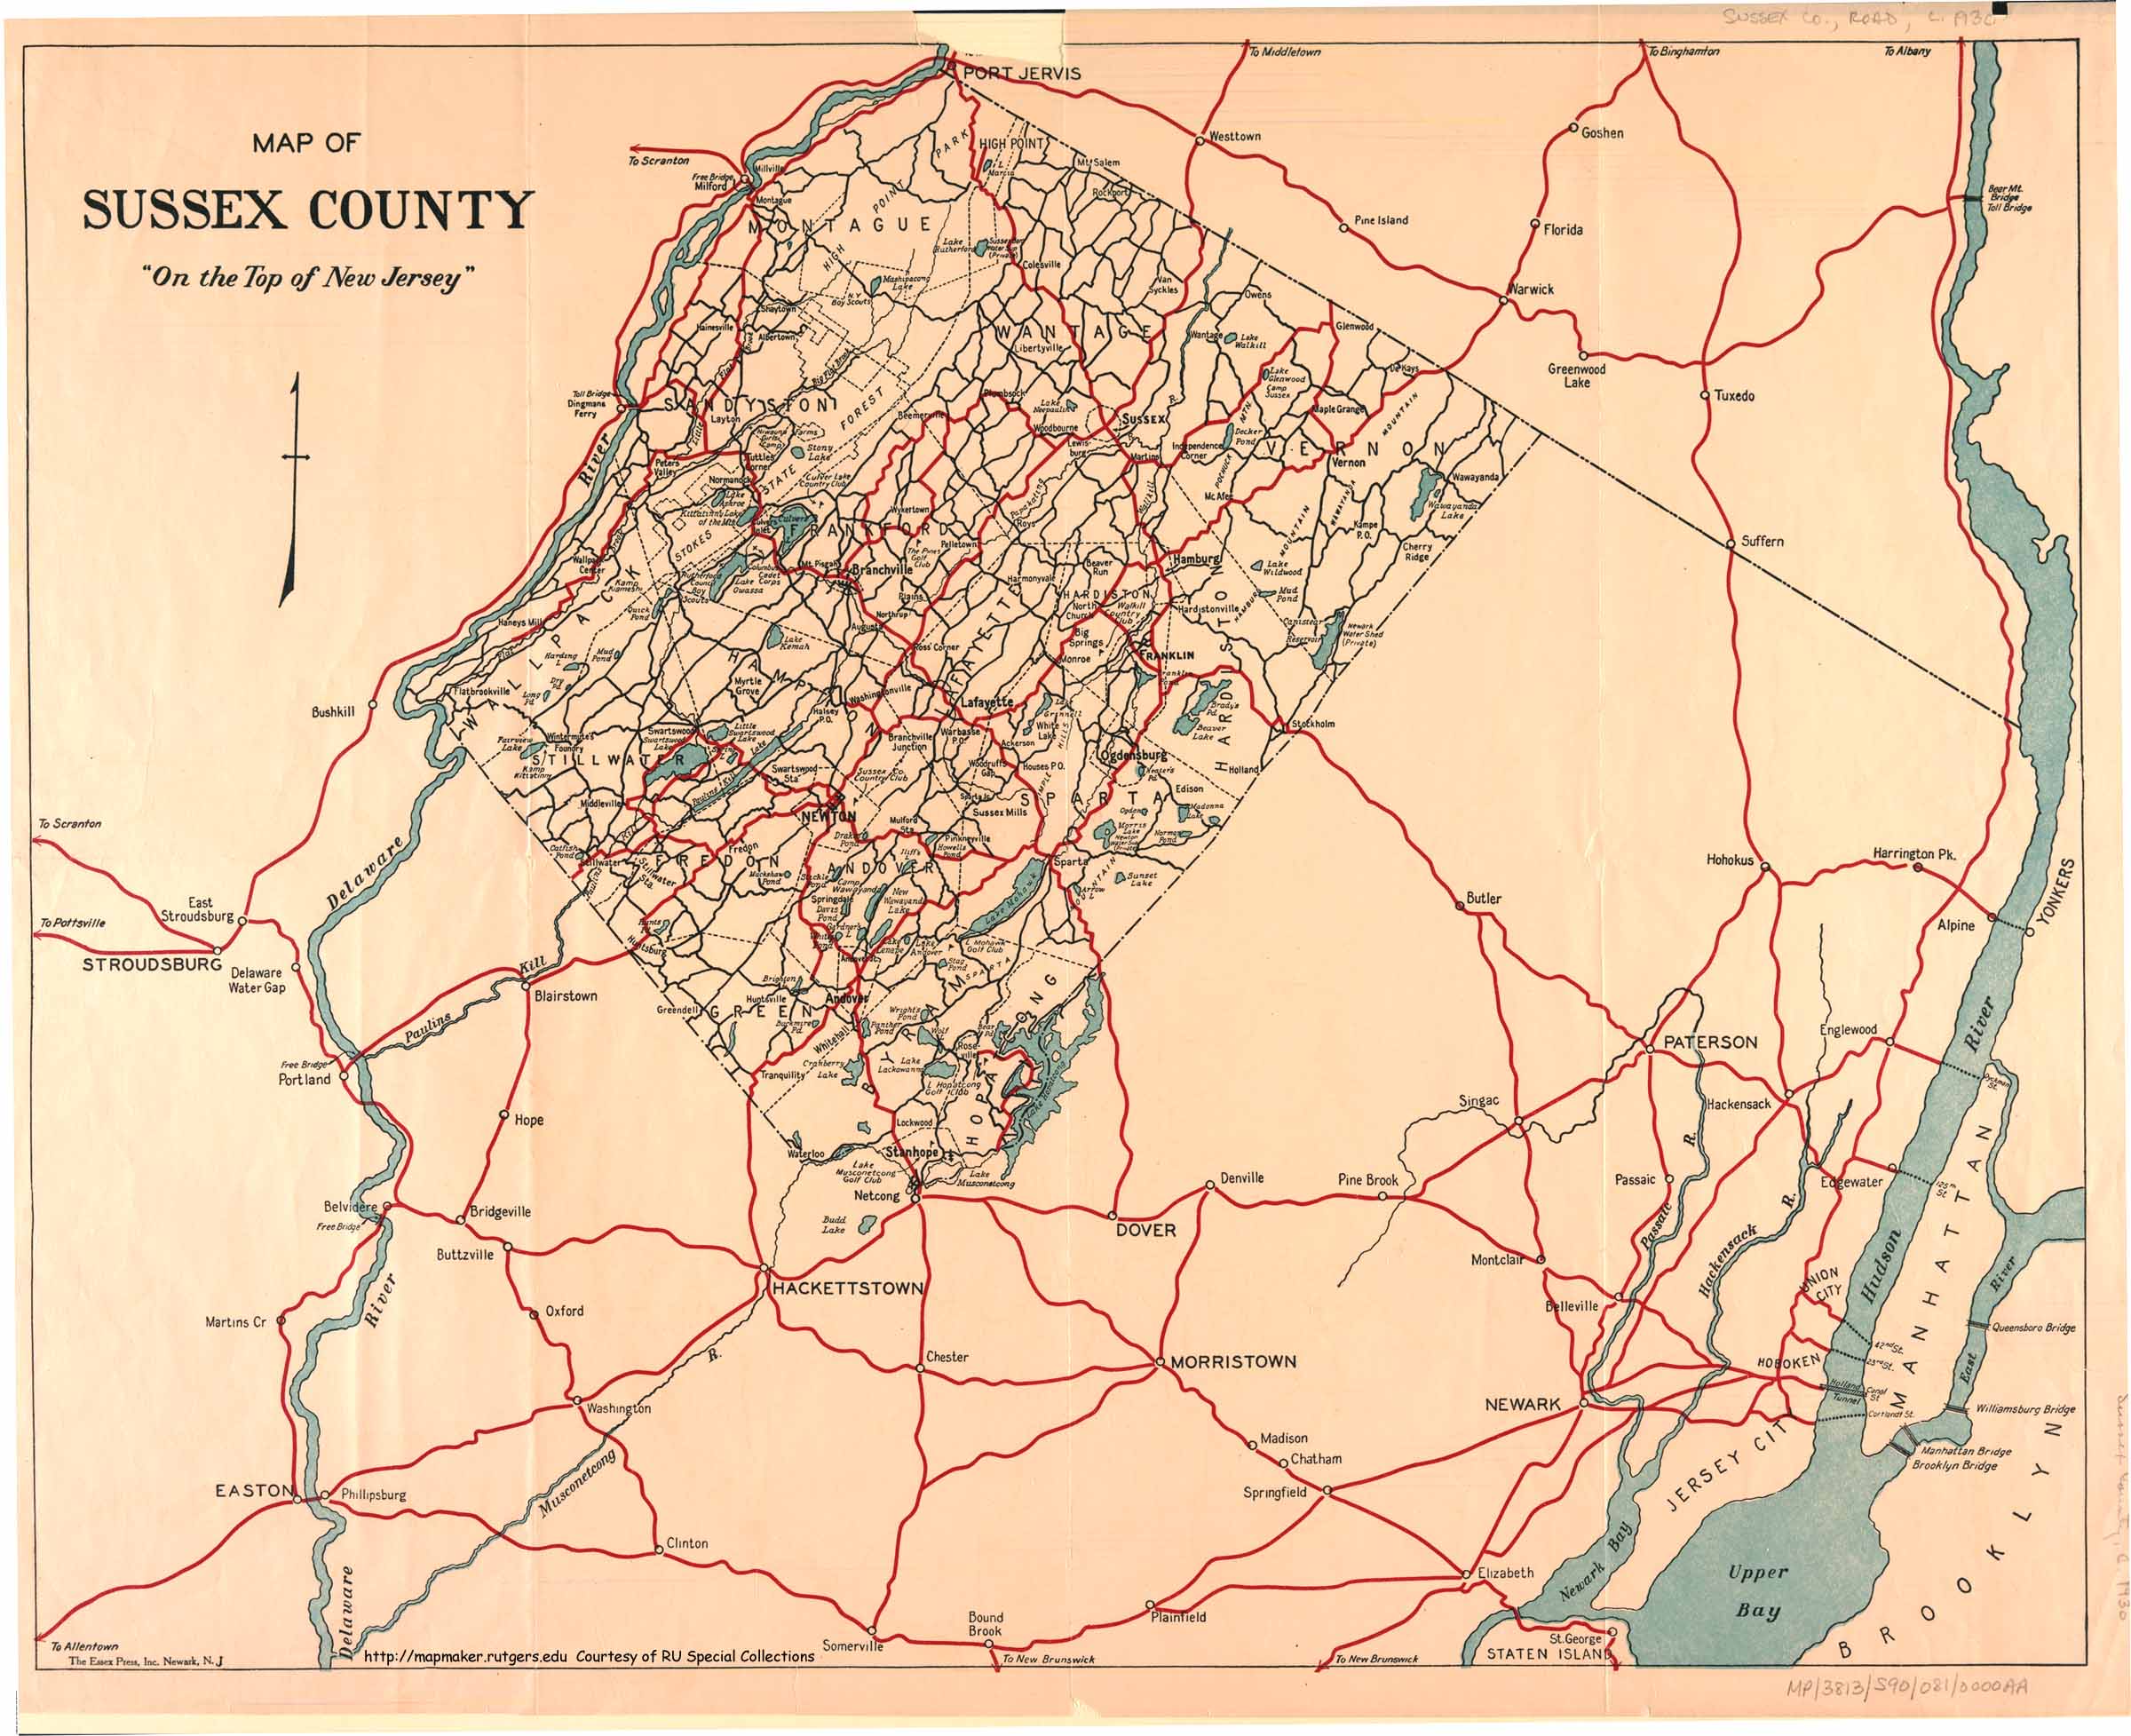 Maps - Sussex County NJ, 1930.